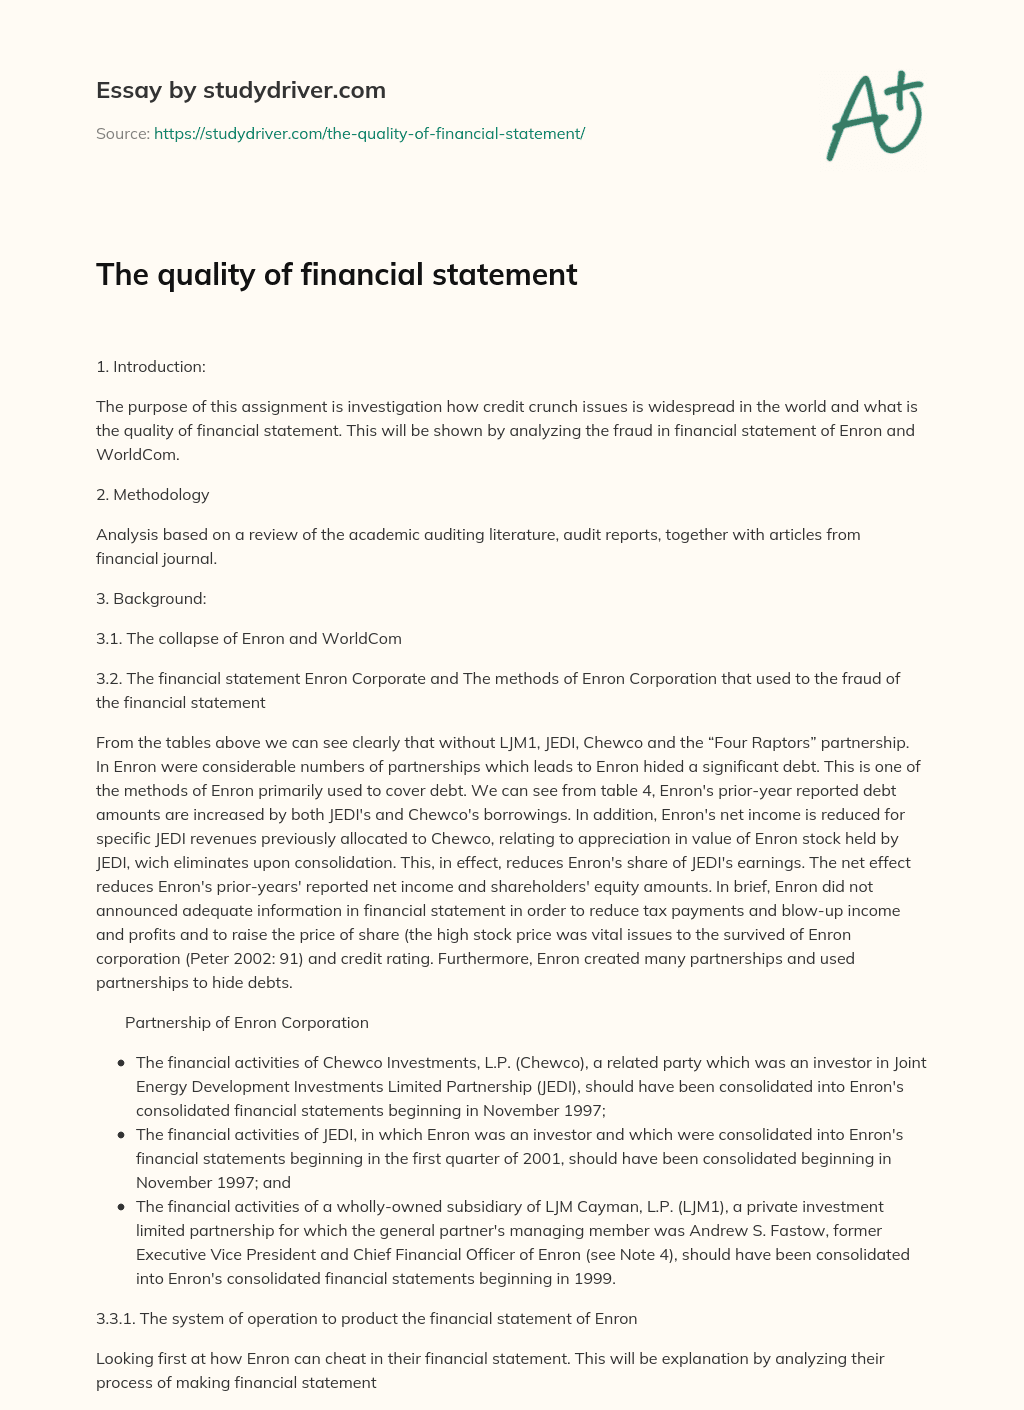 The Quality of Financial Statement essay